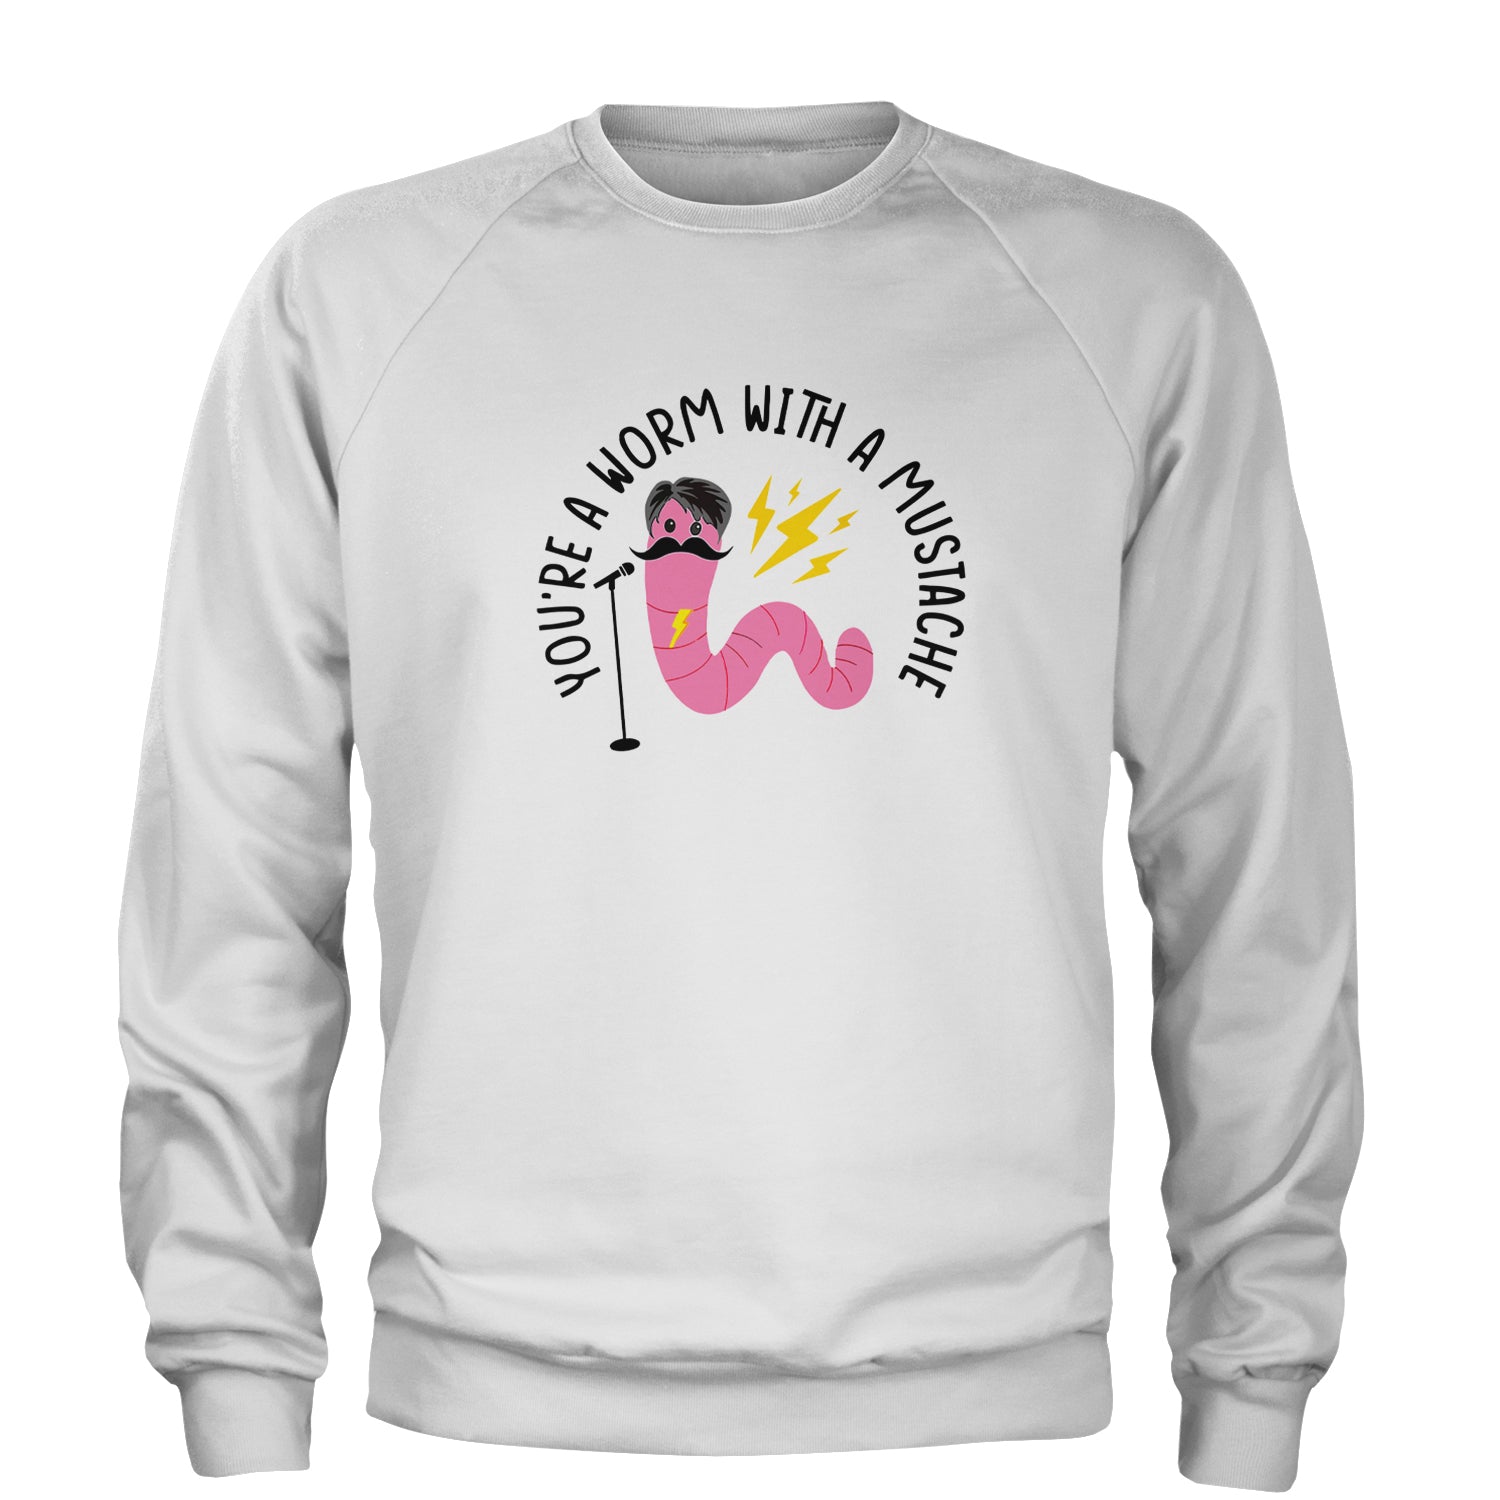 You're A Worm With A Mustache Tom Scandoval Adult Crewneck Sweatshirt